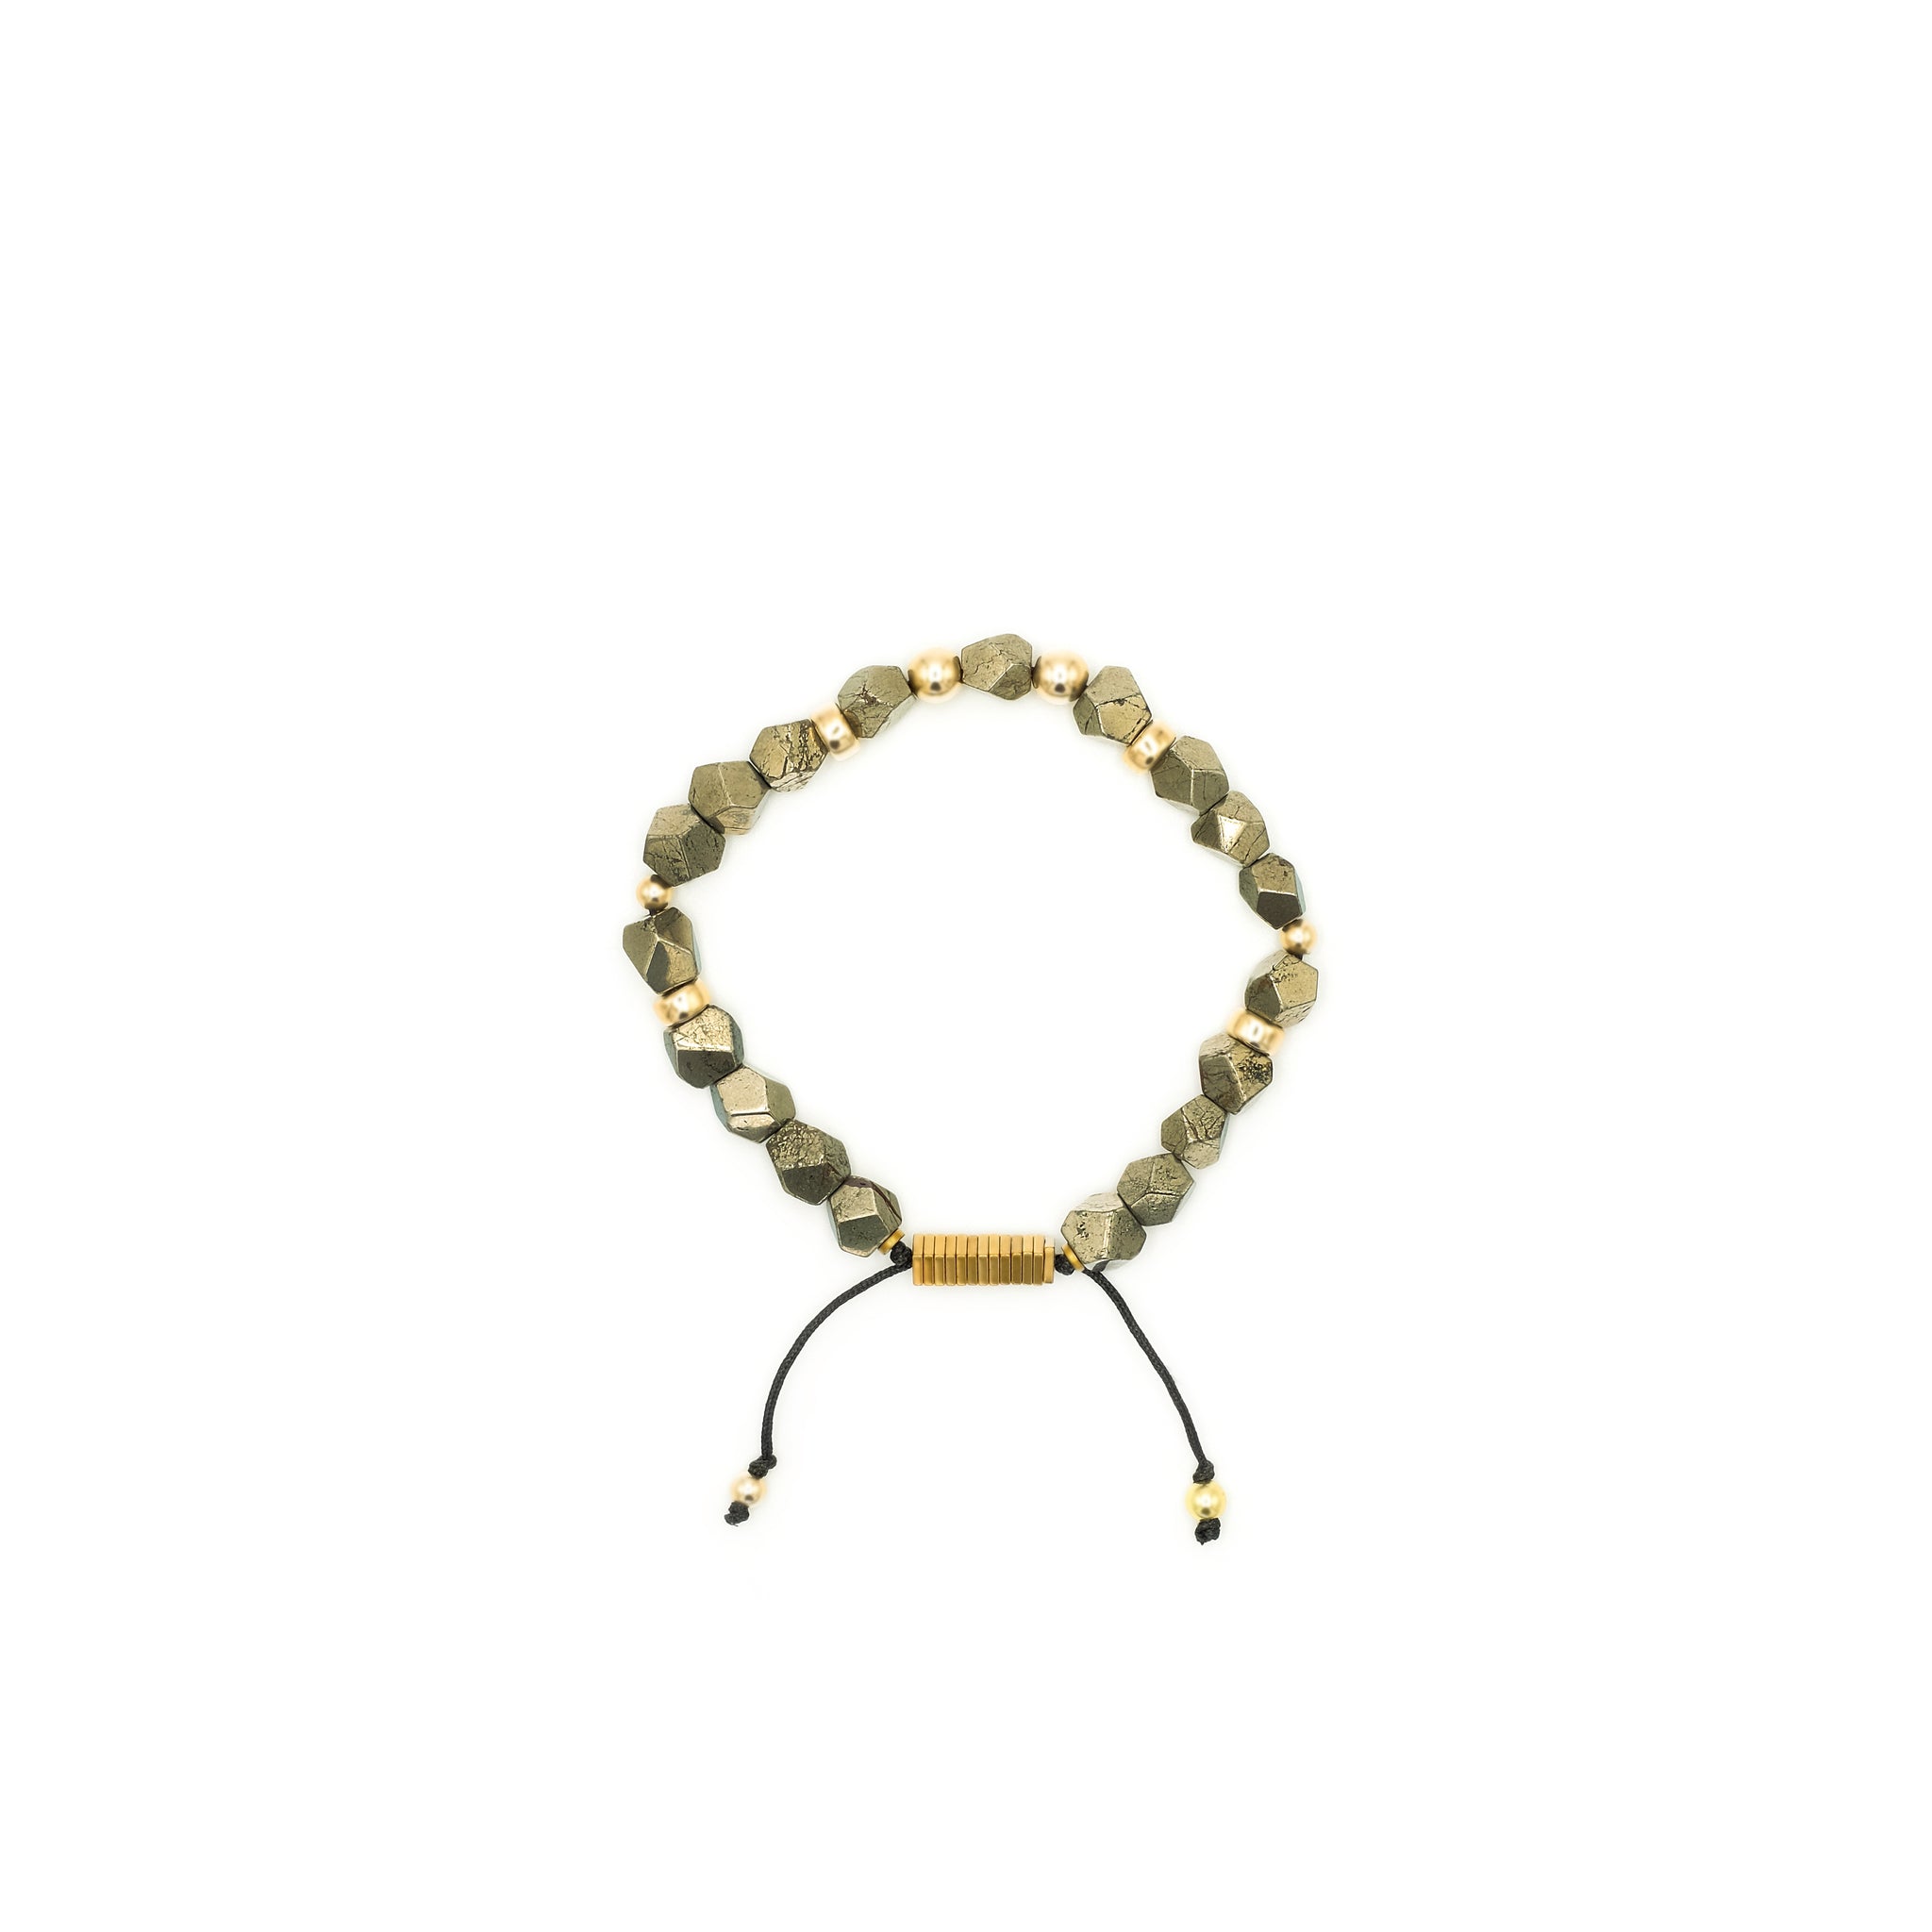 Handcrafted designer stone jewelry pyrite bracelet with a cause - Popvibe